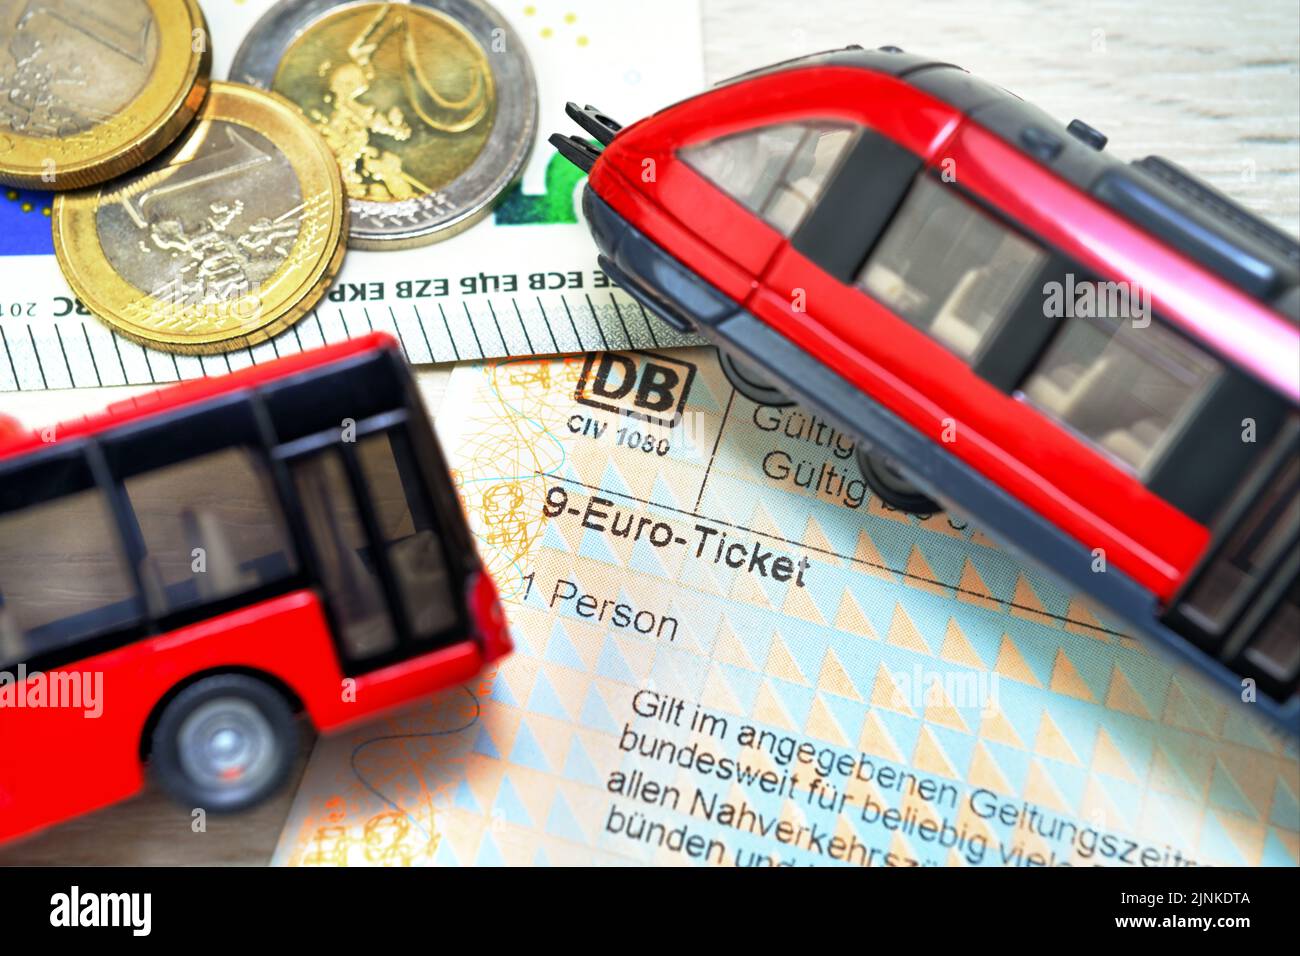 Nine-euro Ticket With Train And Bus Model Stock Photo